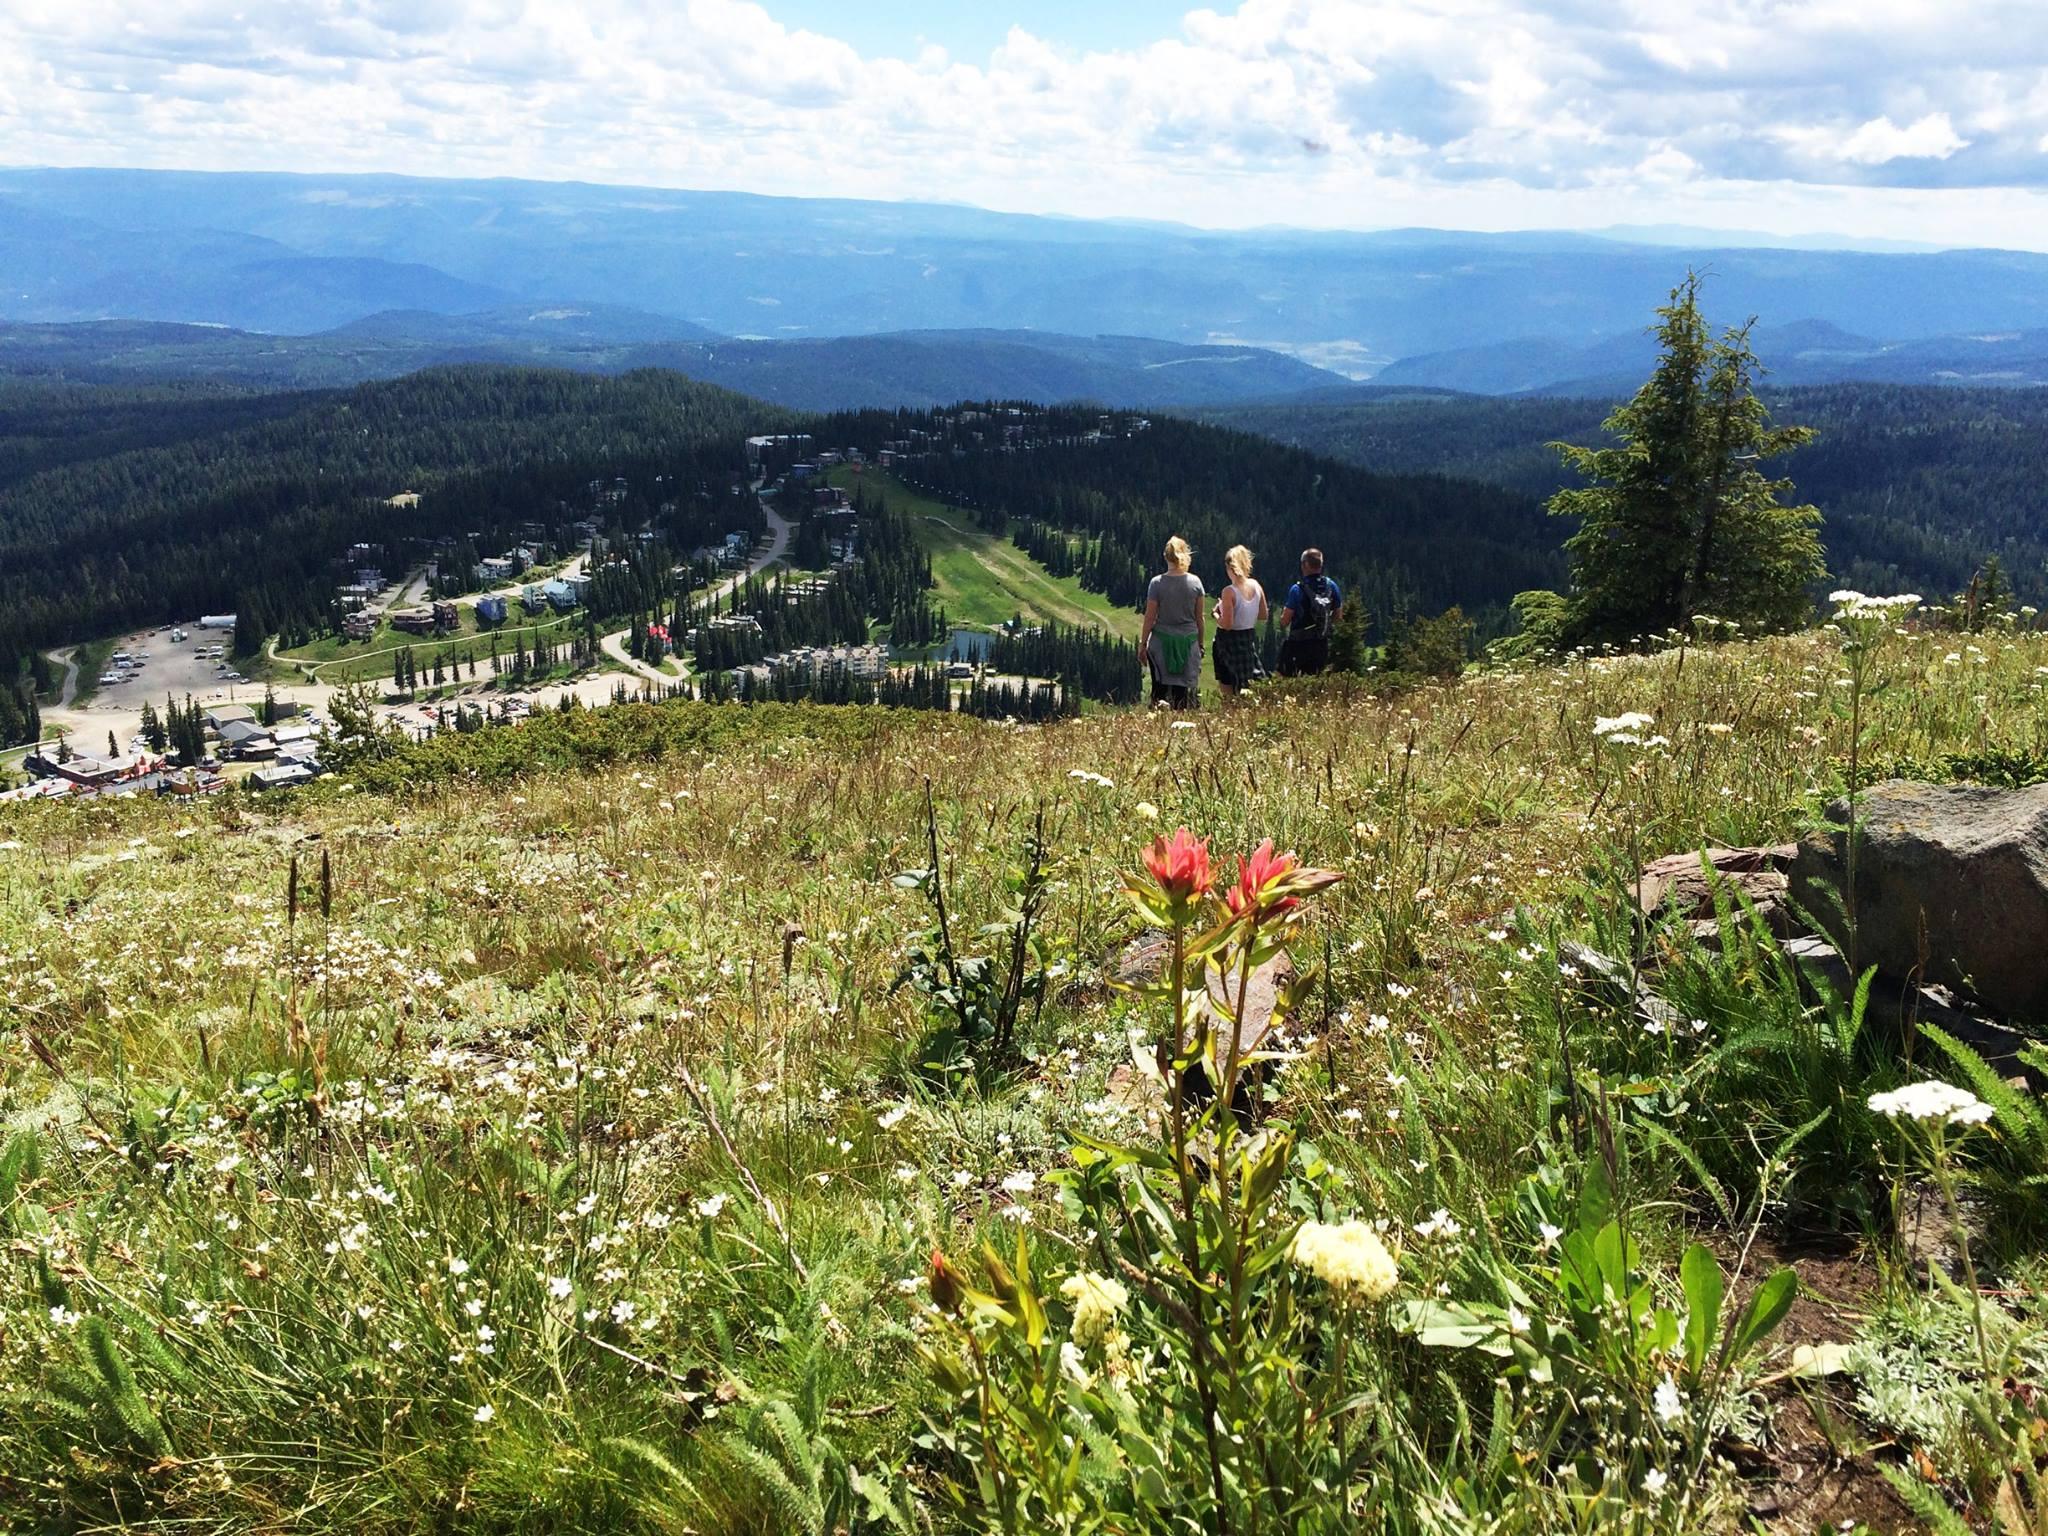 40 EPIC Things to do in Vernon, BC - Must-Do Activities this Summer!